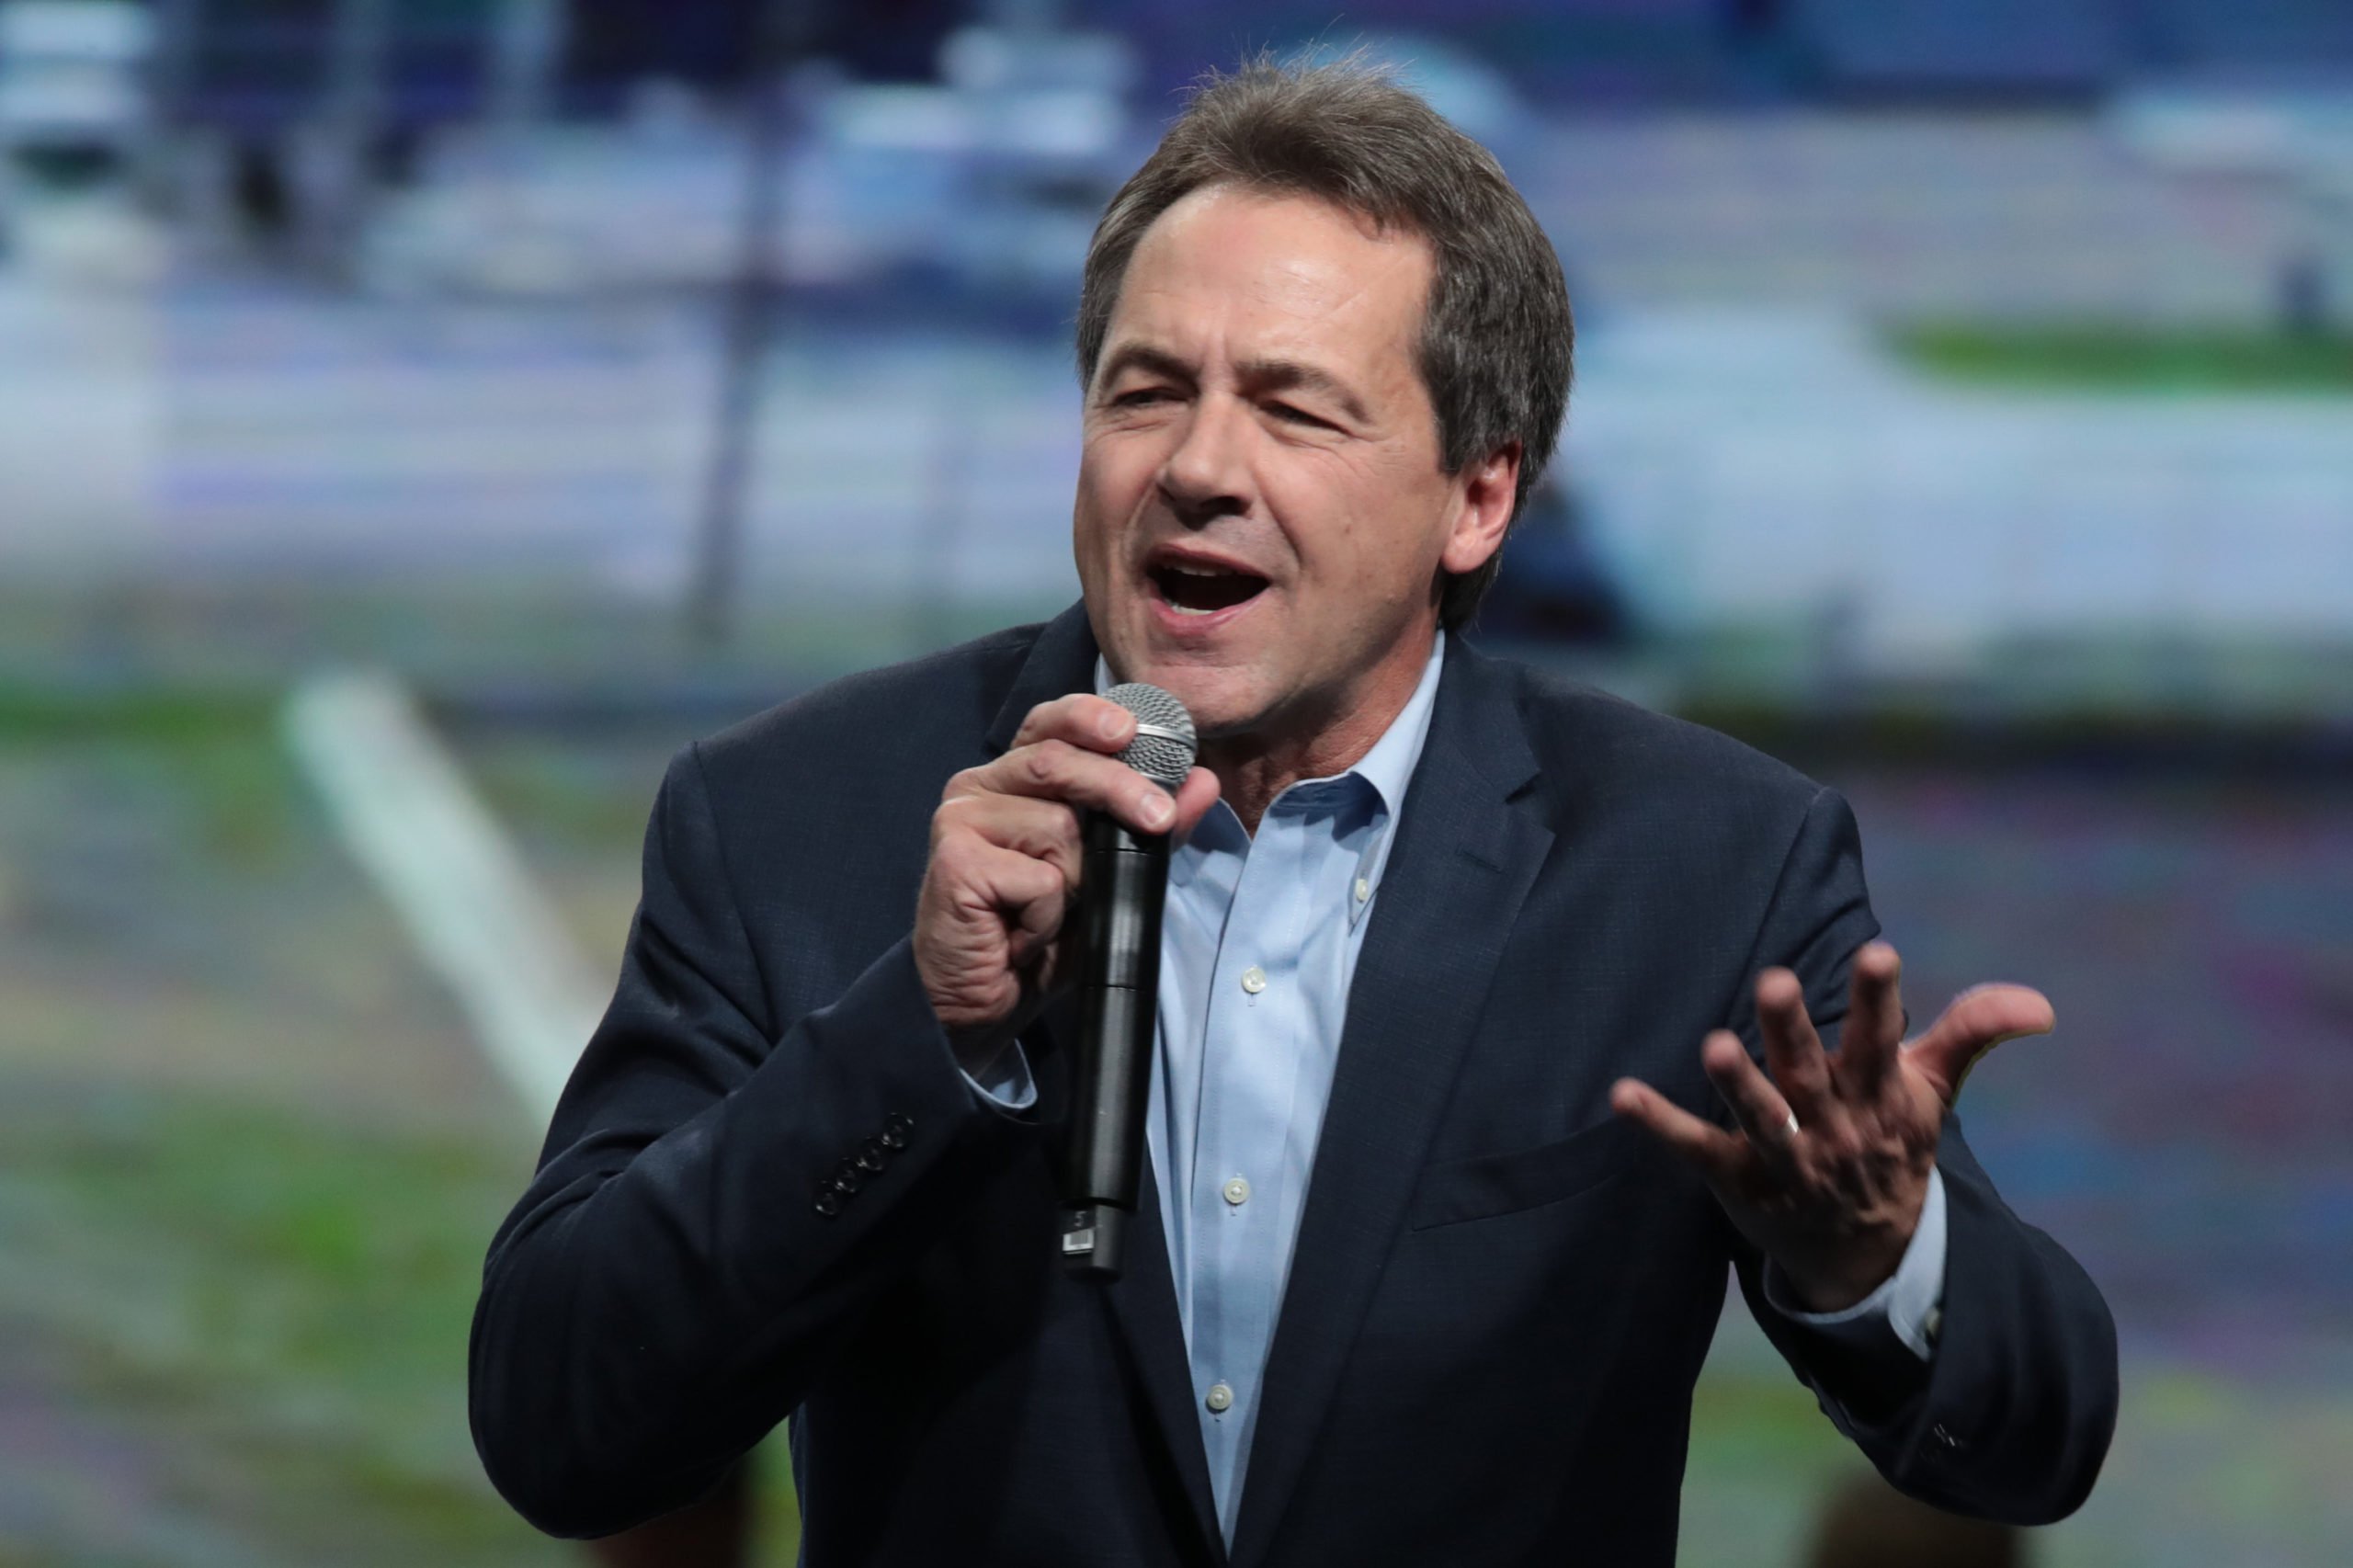 DES MOINES, IOWA - NOVEMBER 01: Democratic presidential candidate Montana governor Steve Bullock speaks at the Liberty and Justice Celebration at the Wells Fargo Arena on November 01, 2019 in Des Moines, Iowa. Fourteen of the candidates hoping to win the Democratic nomination for president are expected to speak at the Celebration. (Photo by Scott Olson/Getty Images)